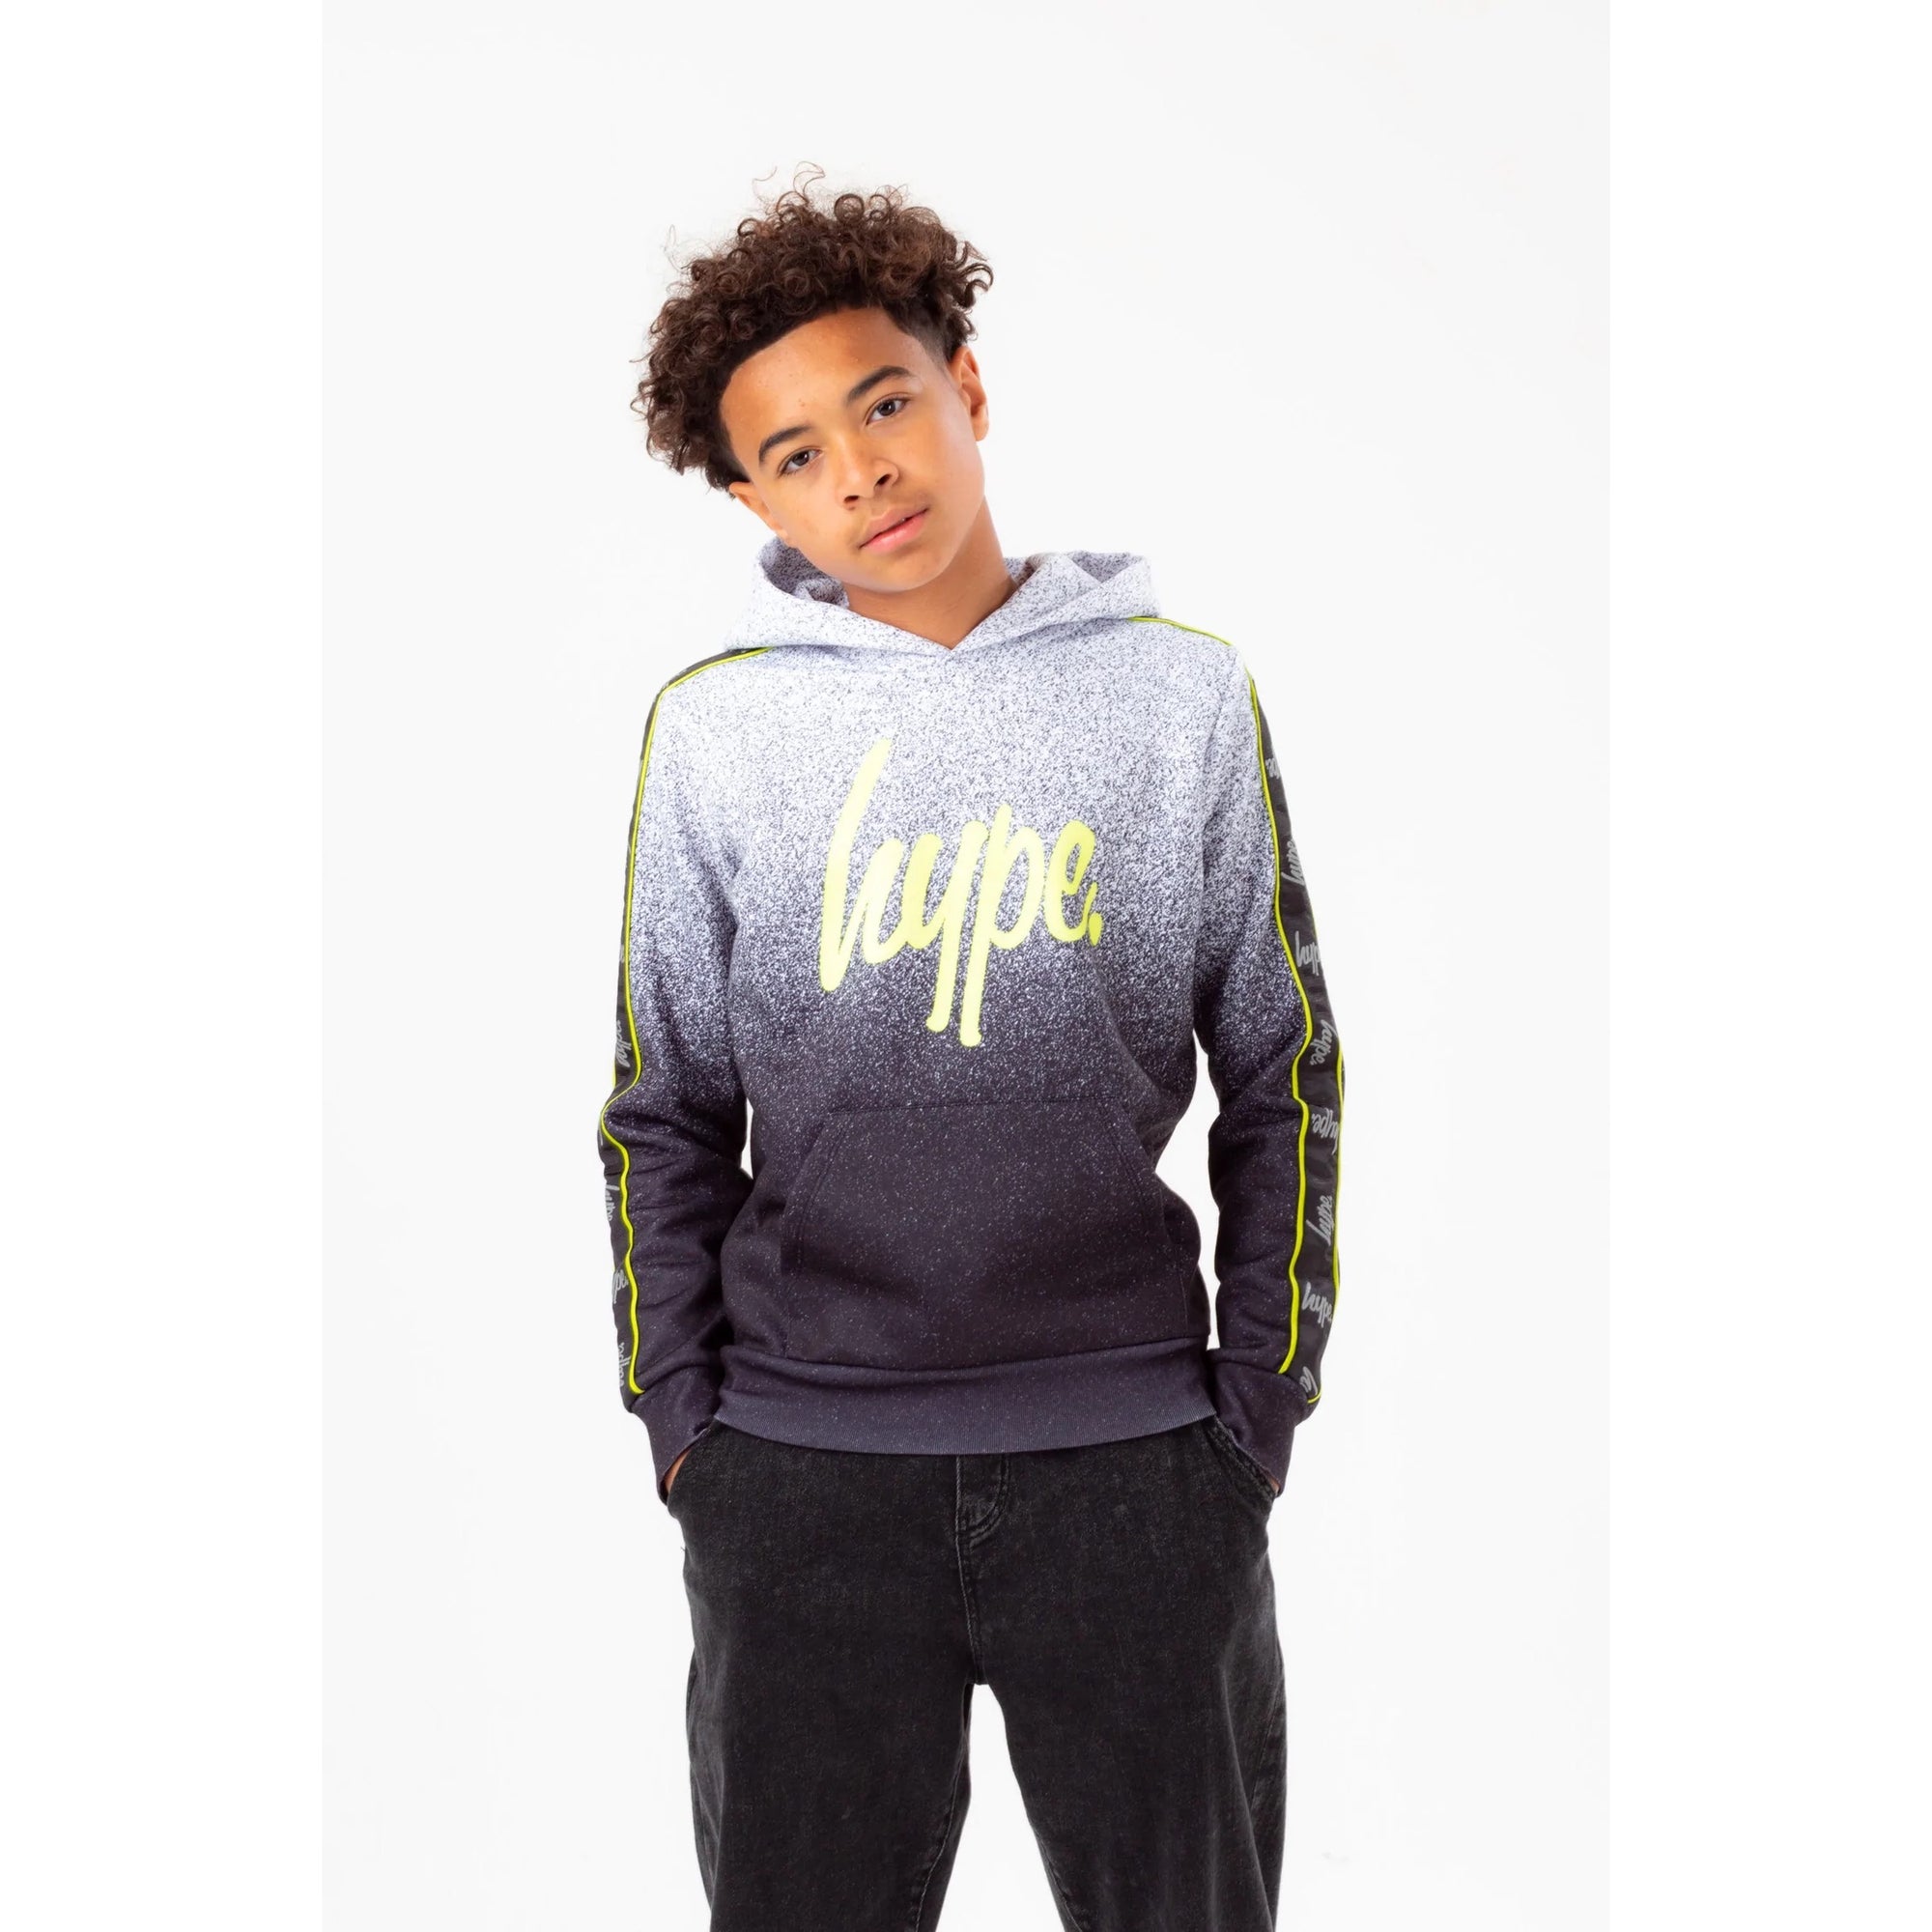 Hype Mono Speckle Fade Tape Hoodie Yvlr388 Clothing 9/10YRS / Black,11/12YRS / Black,13YRS / Black,14YRS / Black,15YRS / Black